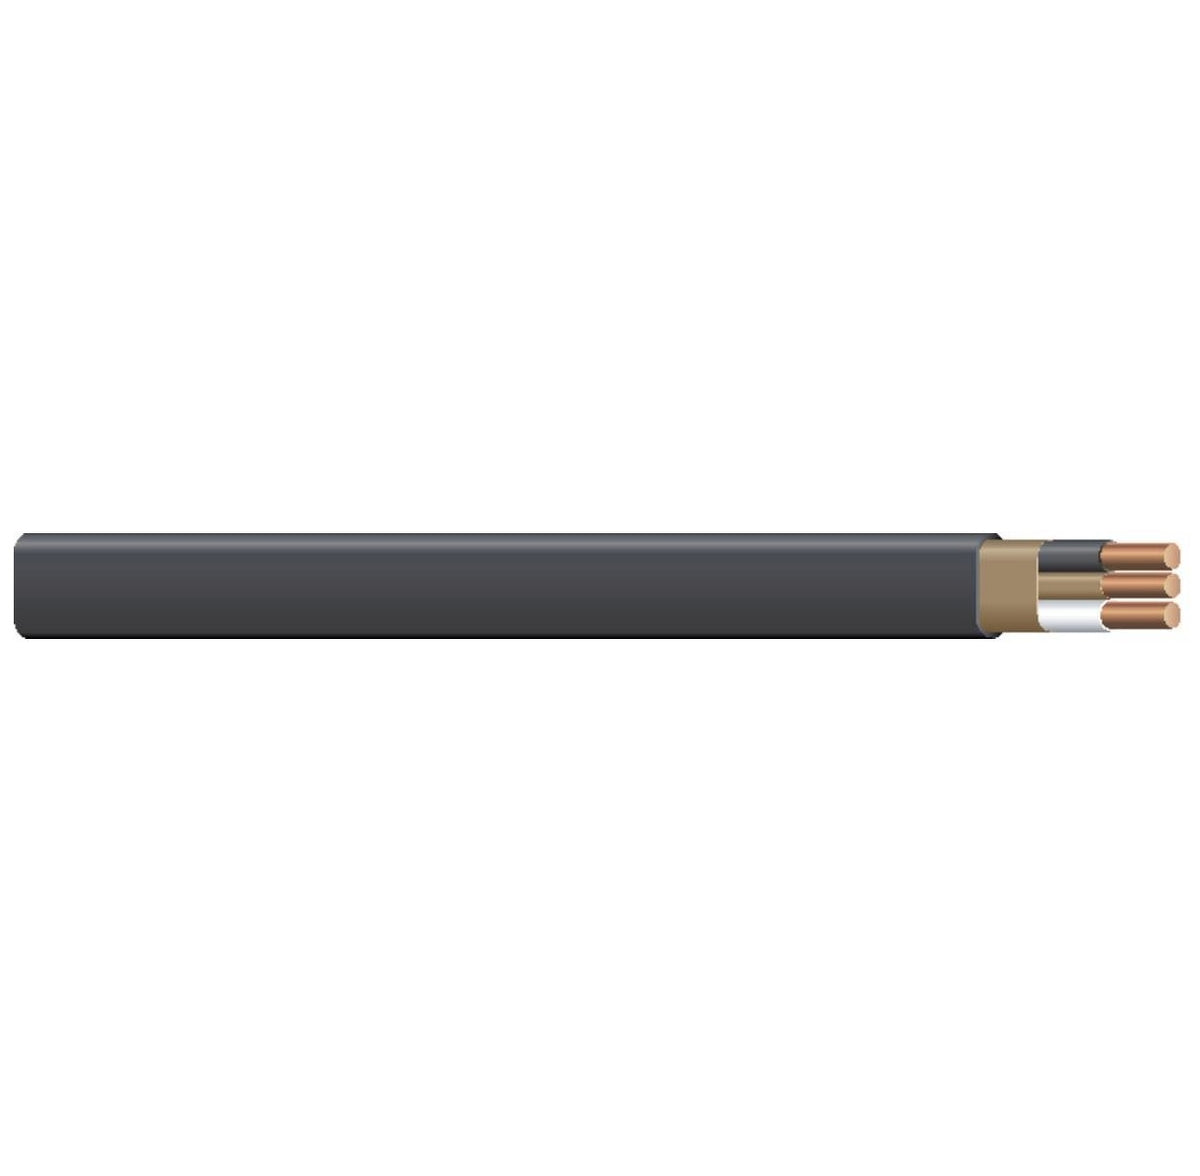 Southwire 28894401 Nonmetallic-Sheathed Cable, 1000 Feet